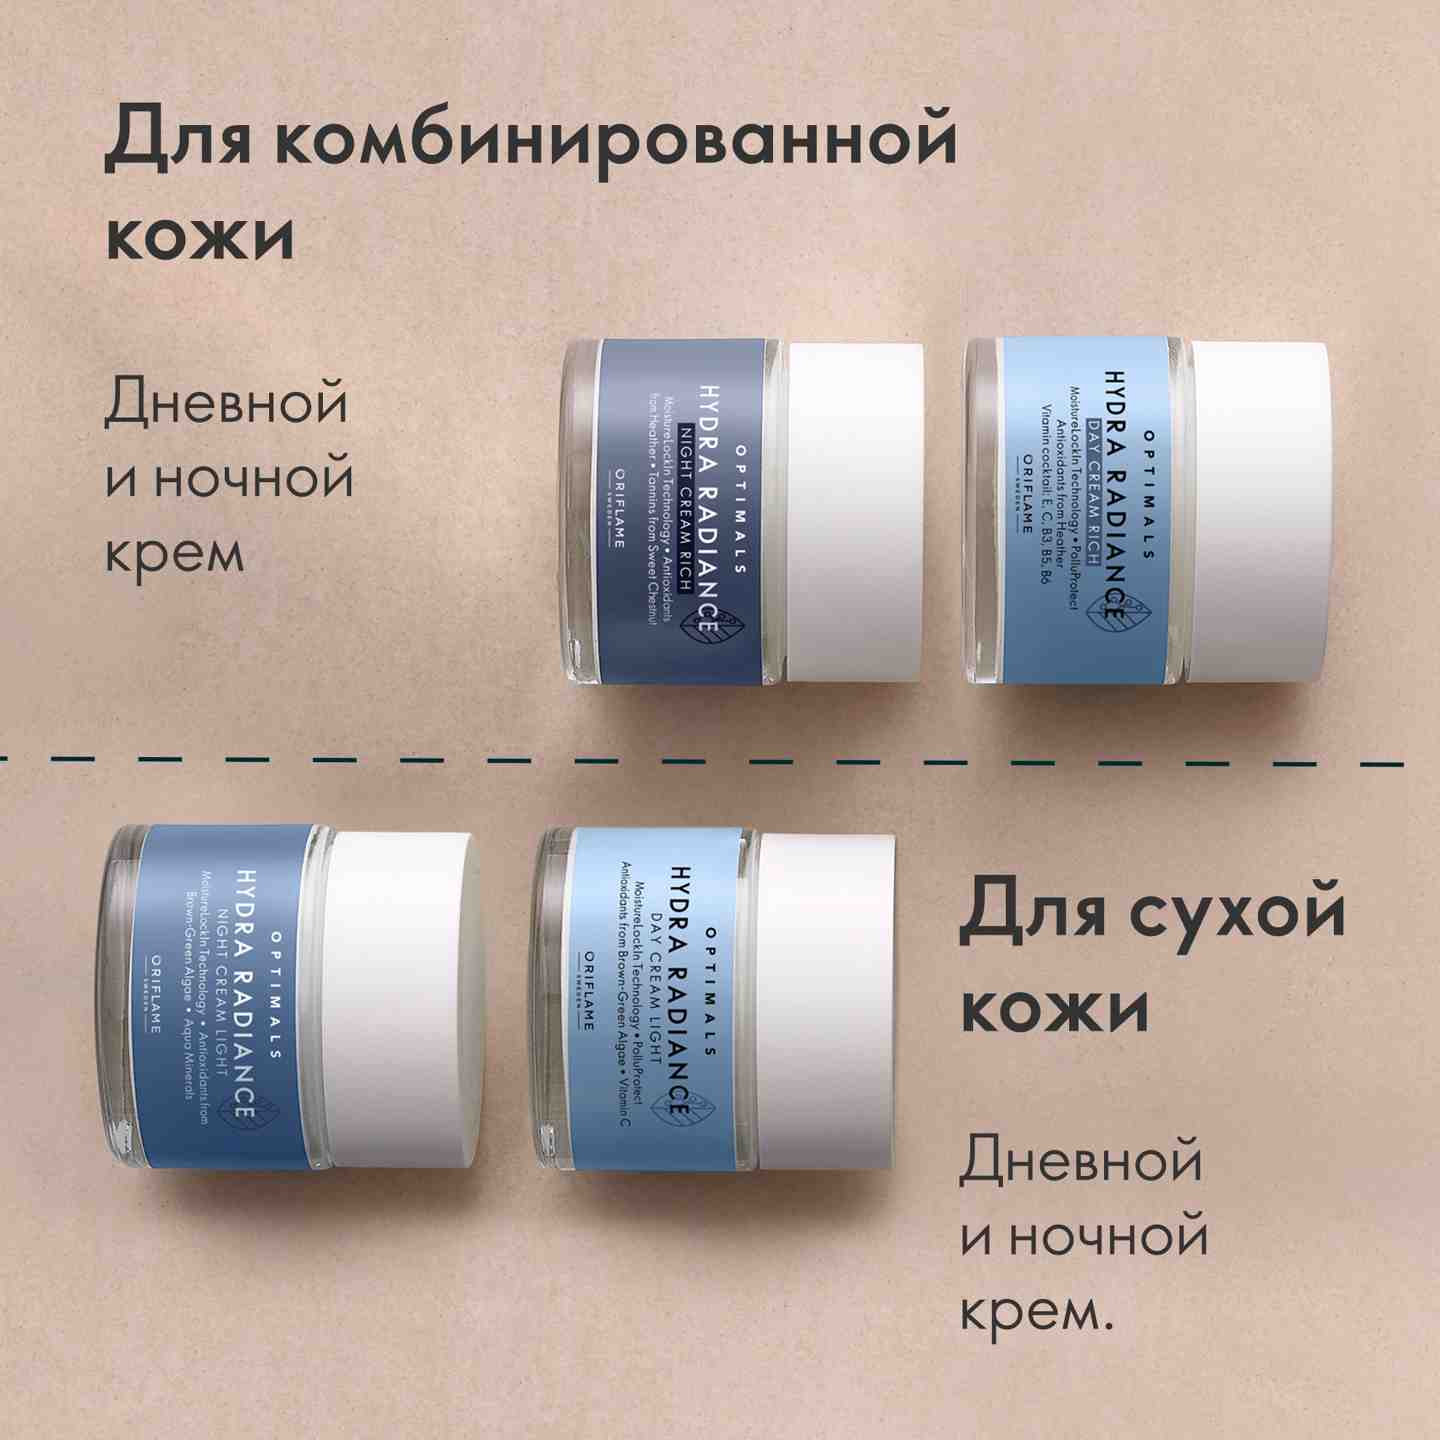 https://media-cdn.oriflame.com/productImage?externalMediaId=product-management-media%2fProducts%2f42588%2fAZ%2f42588_4.png&id=15124780&version=1